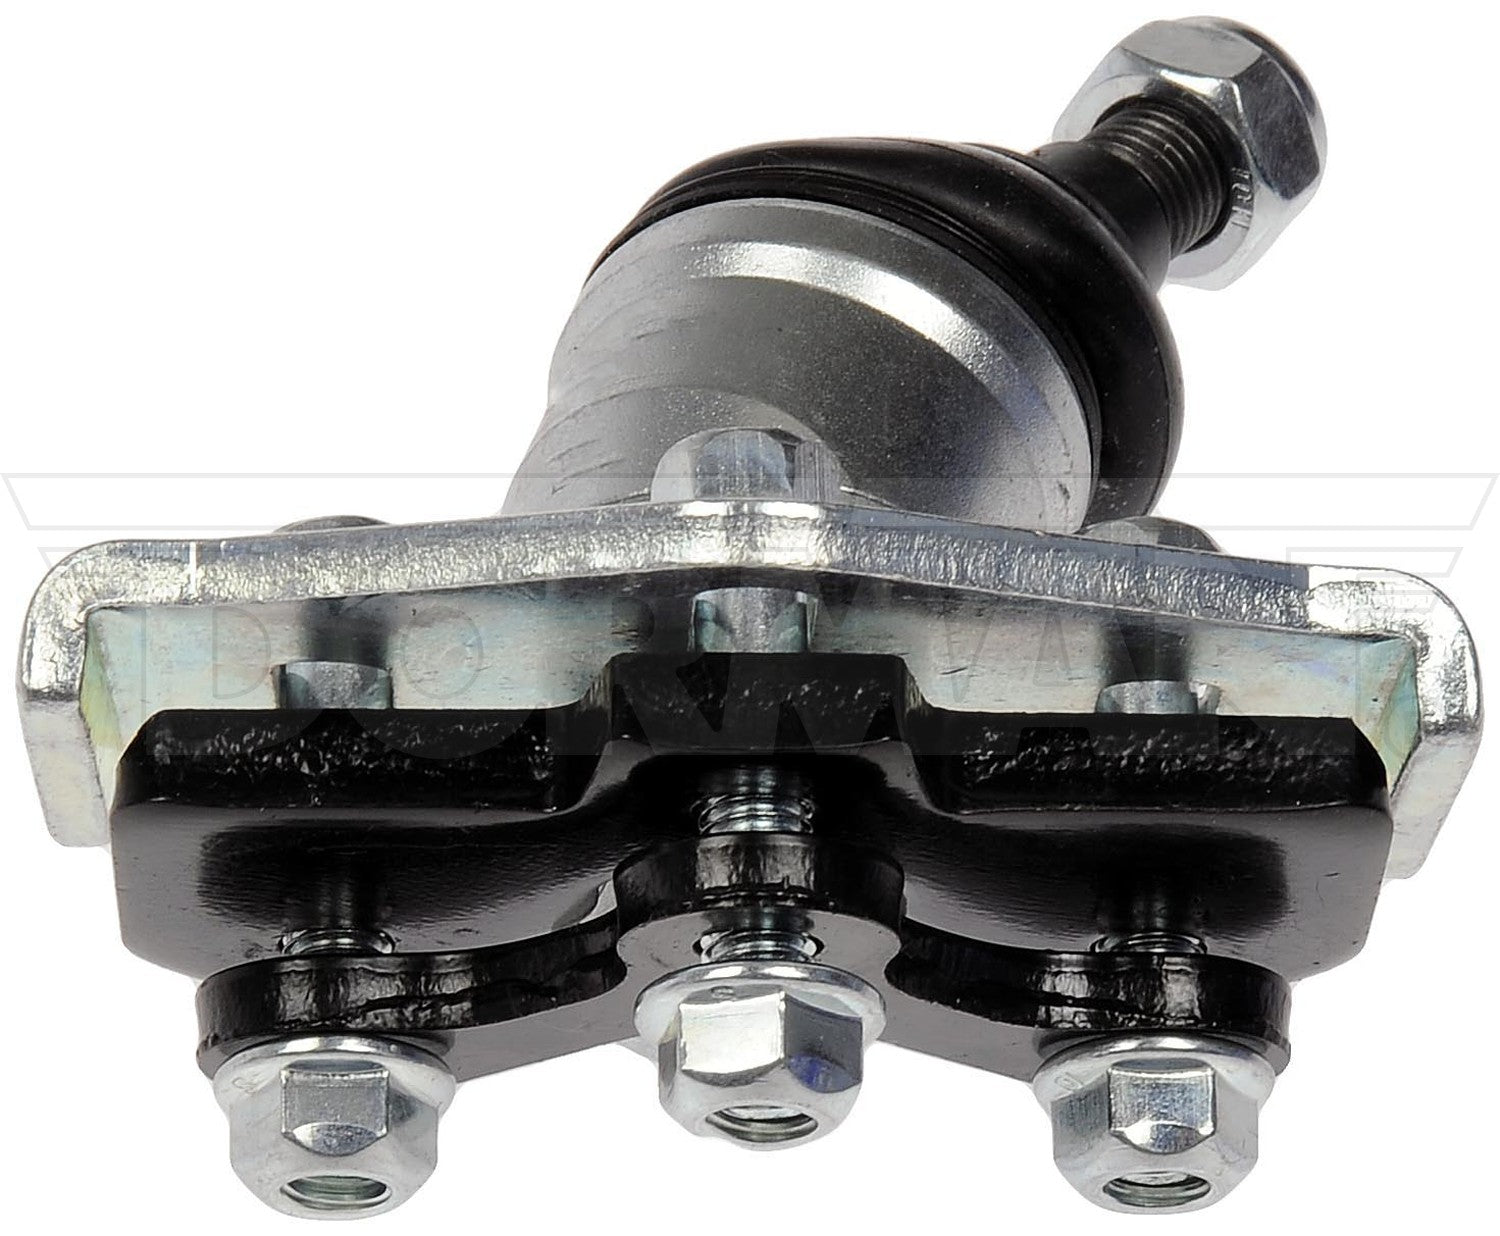 Dorman 539-024 Front Lower Alignment Caster / Camber Ball Joint for Volkswagen Beetle Golf Jetta FWD